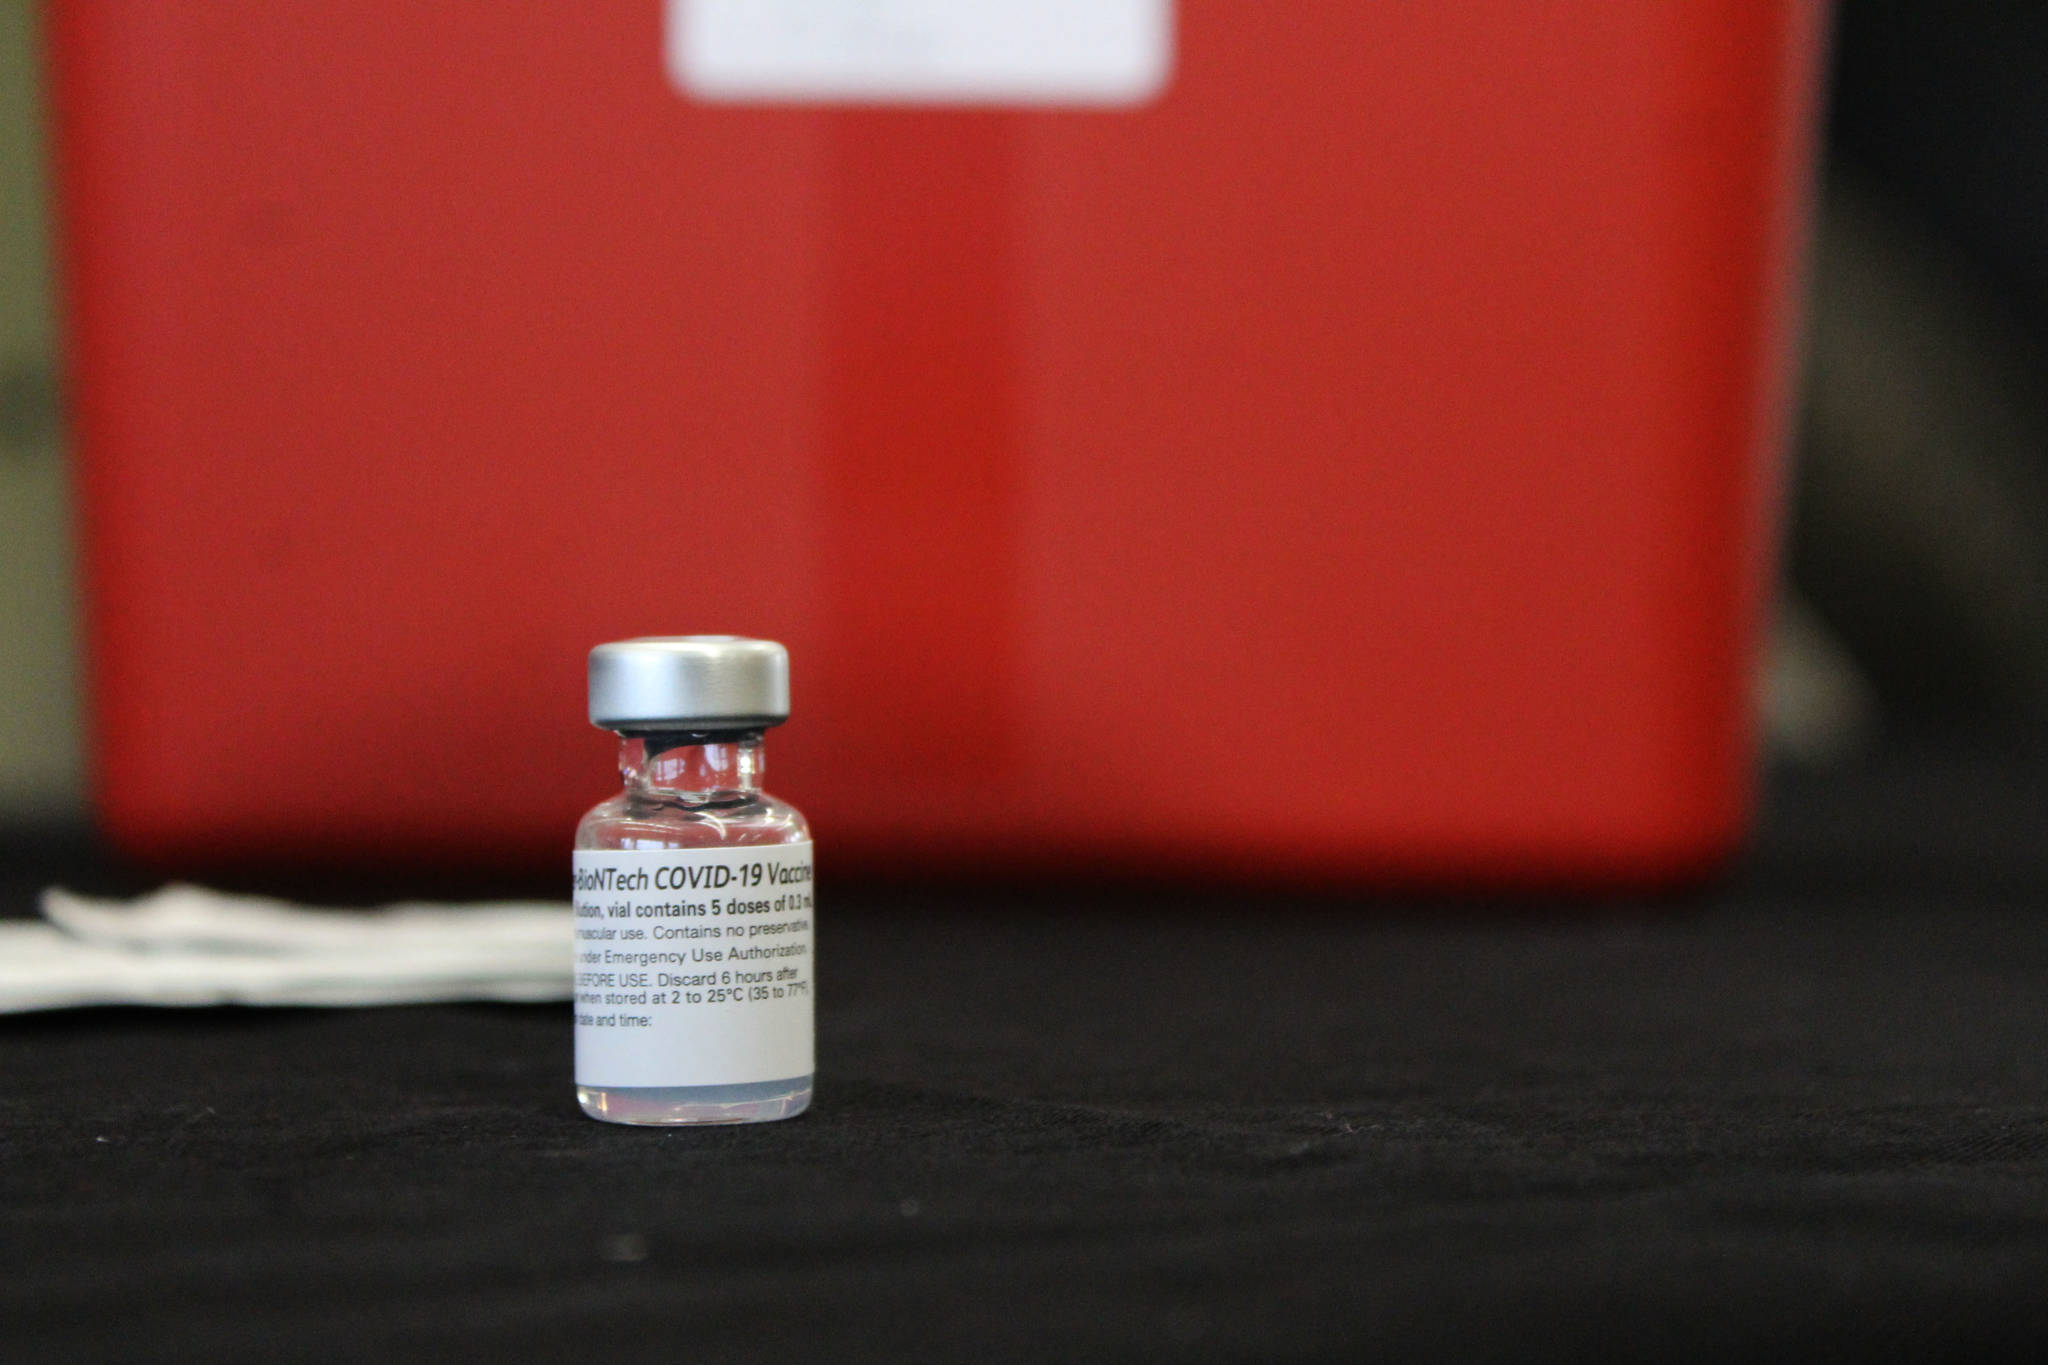 A vial of Pfizer’s COVID-19 vaccine is seen at Central Emergency Services Station 1 on Friday, Dec. 18 in Soldotna, Alaska. (Ashlyn O’Hara/Peninsula Clarion)